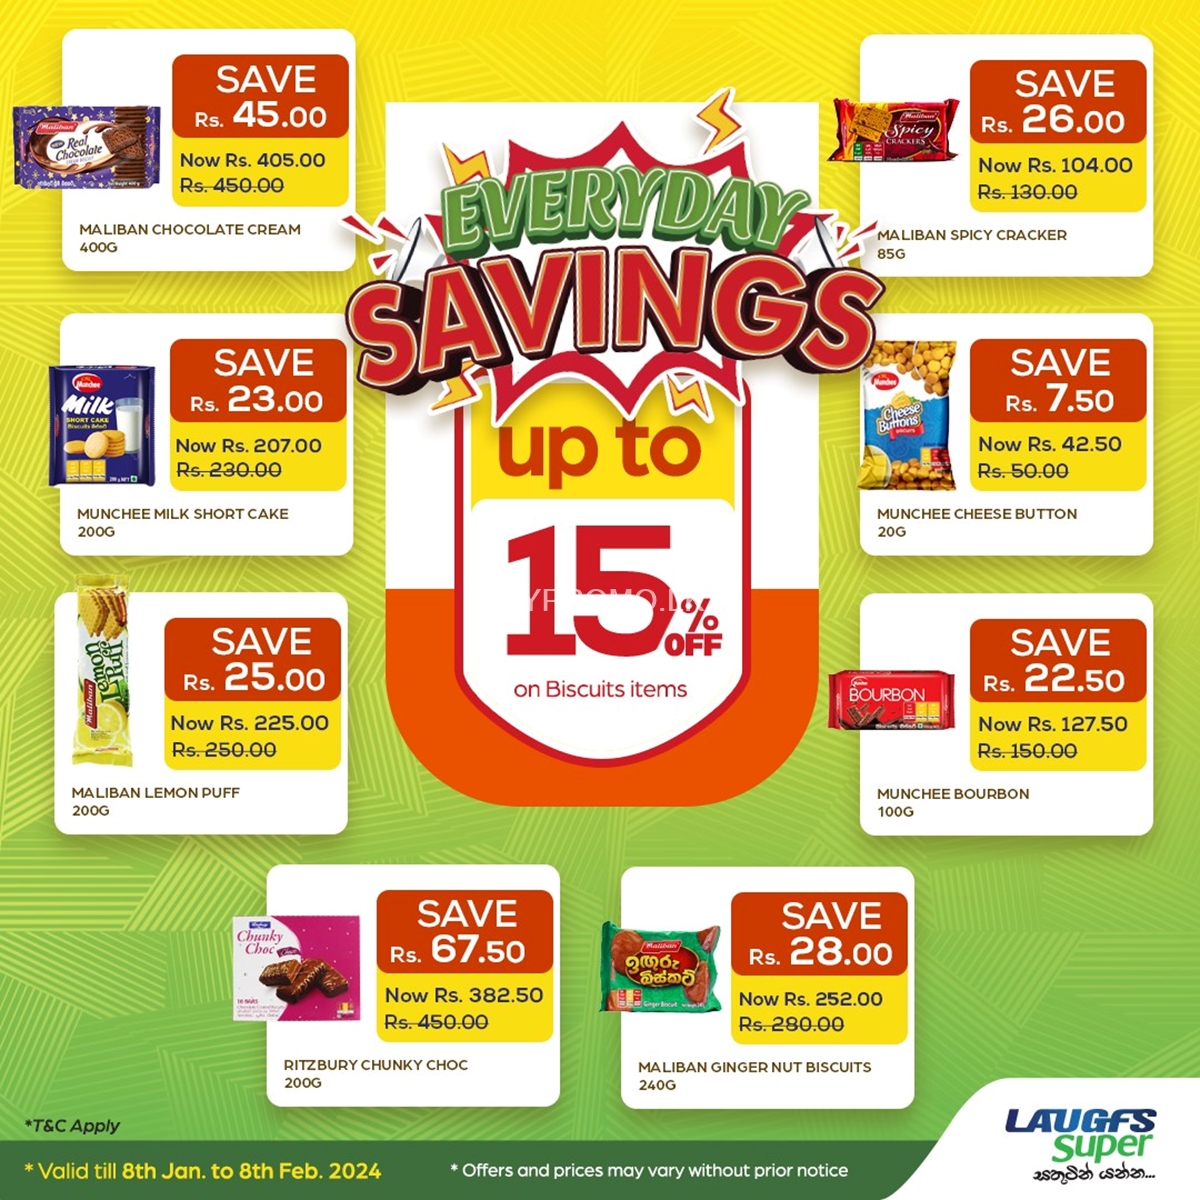 Up to 15% Off on Biscuit Items at LAUGFS Supermarket